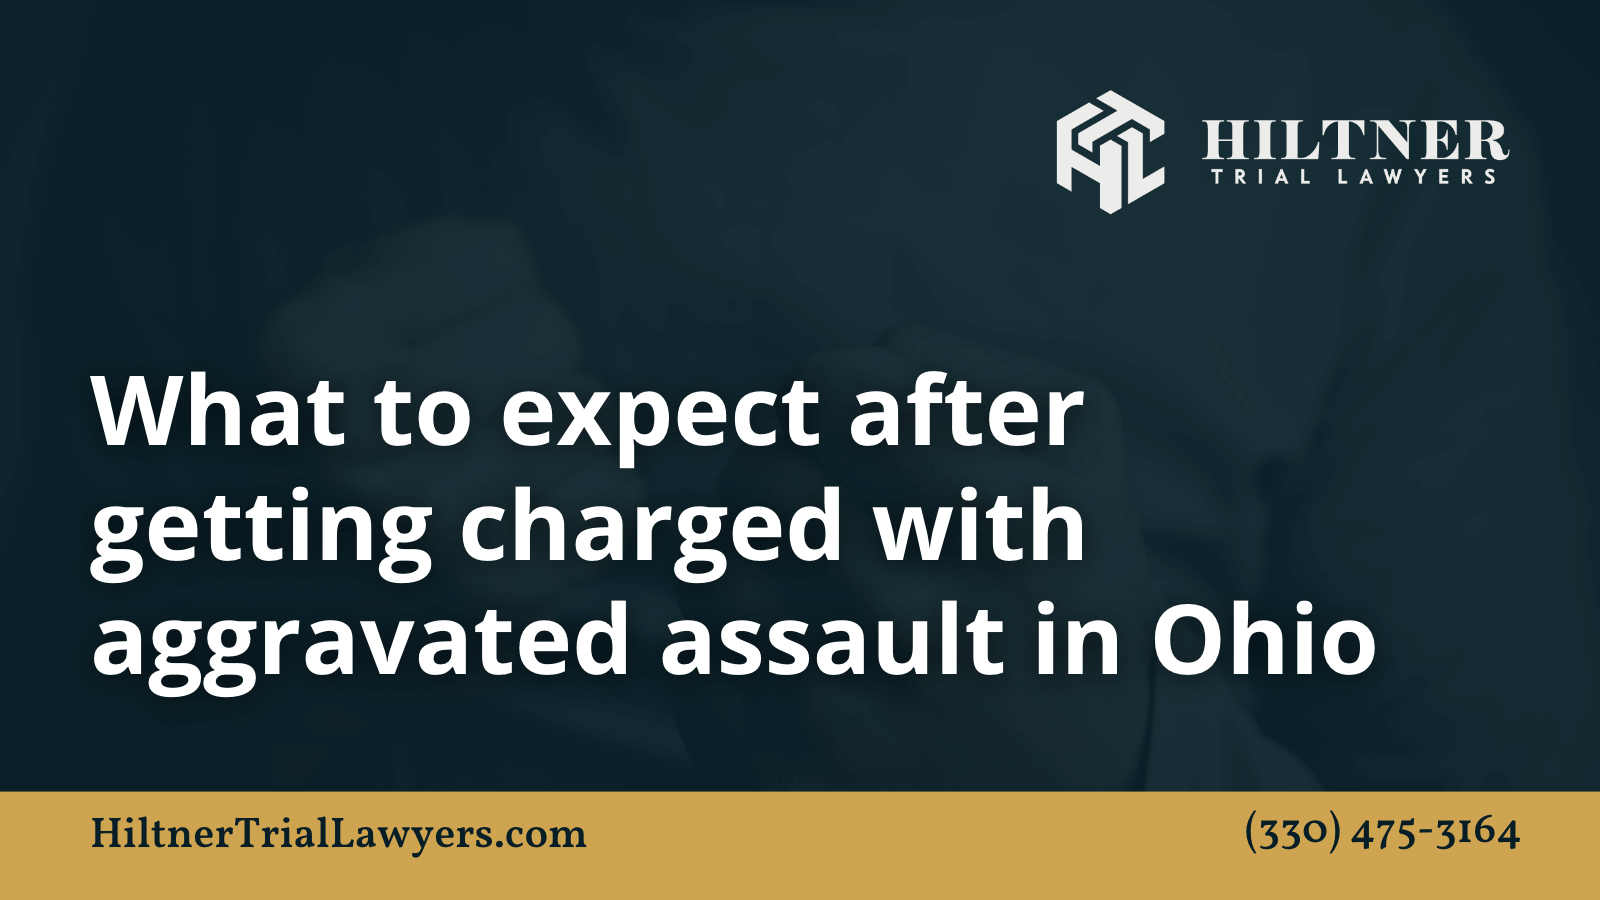 What to expect after getting charged with aggravated assault in Ohio - Hiltner Trial Lawyers Ohio - max hiltner